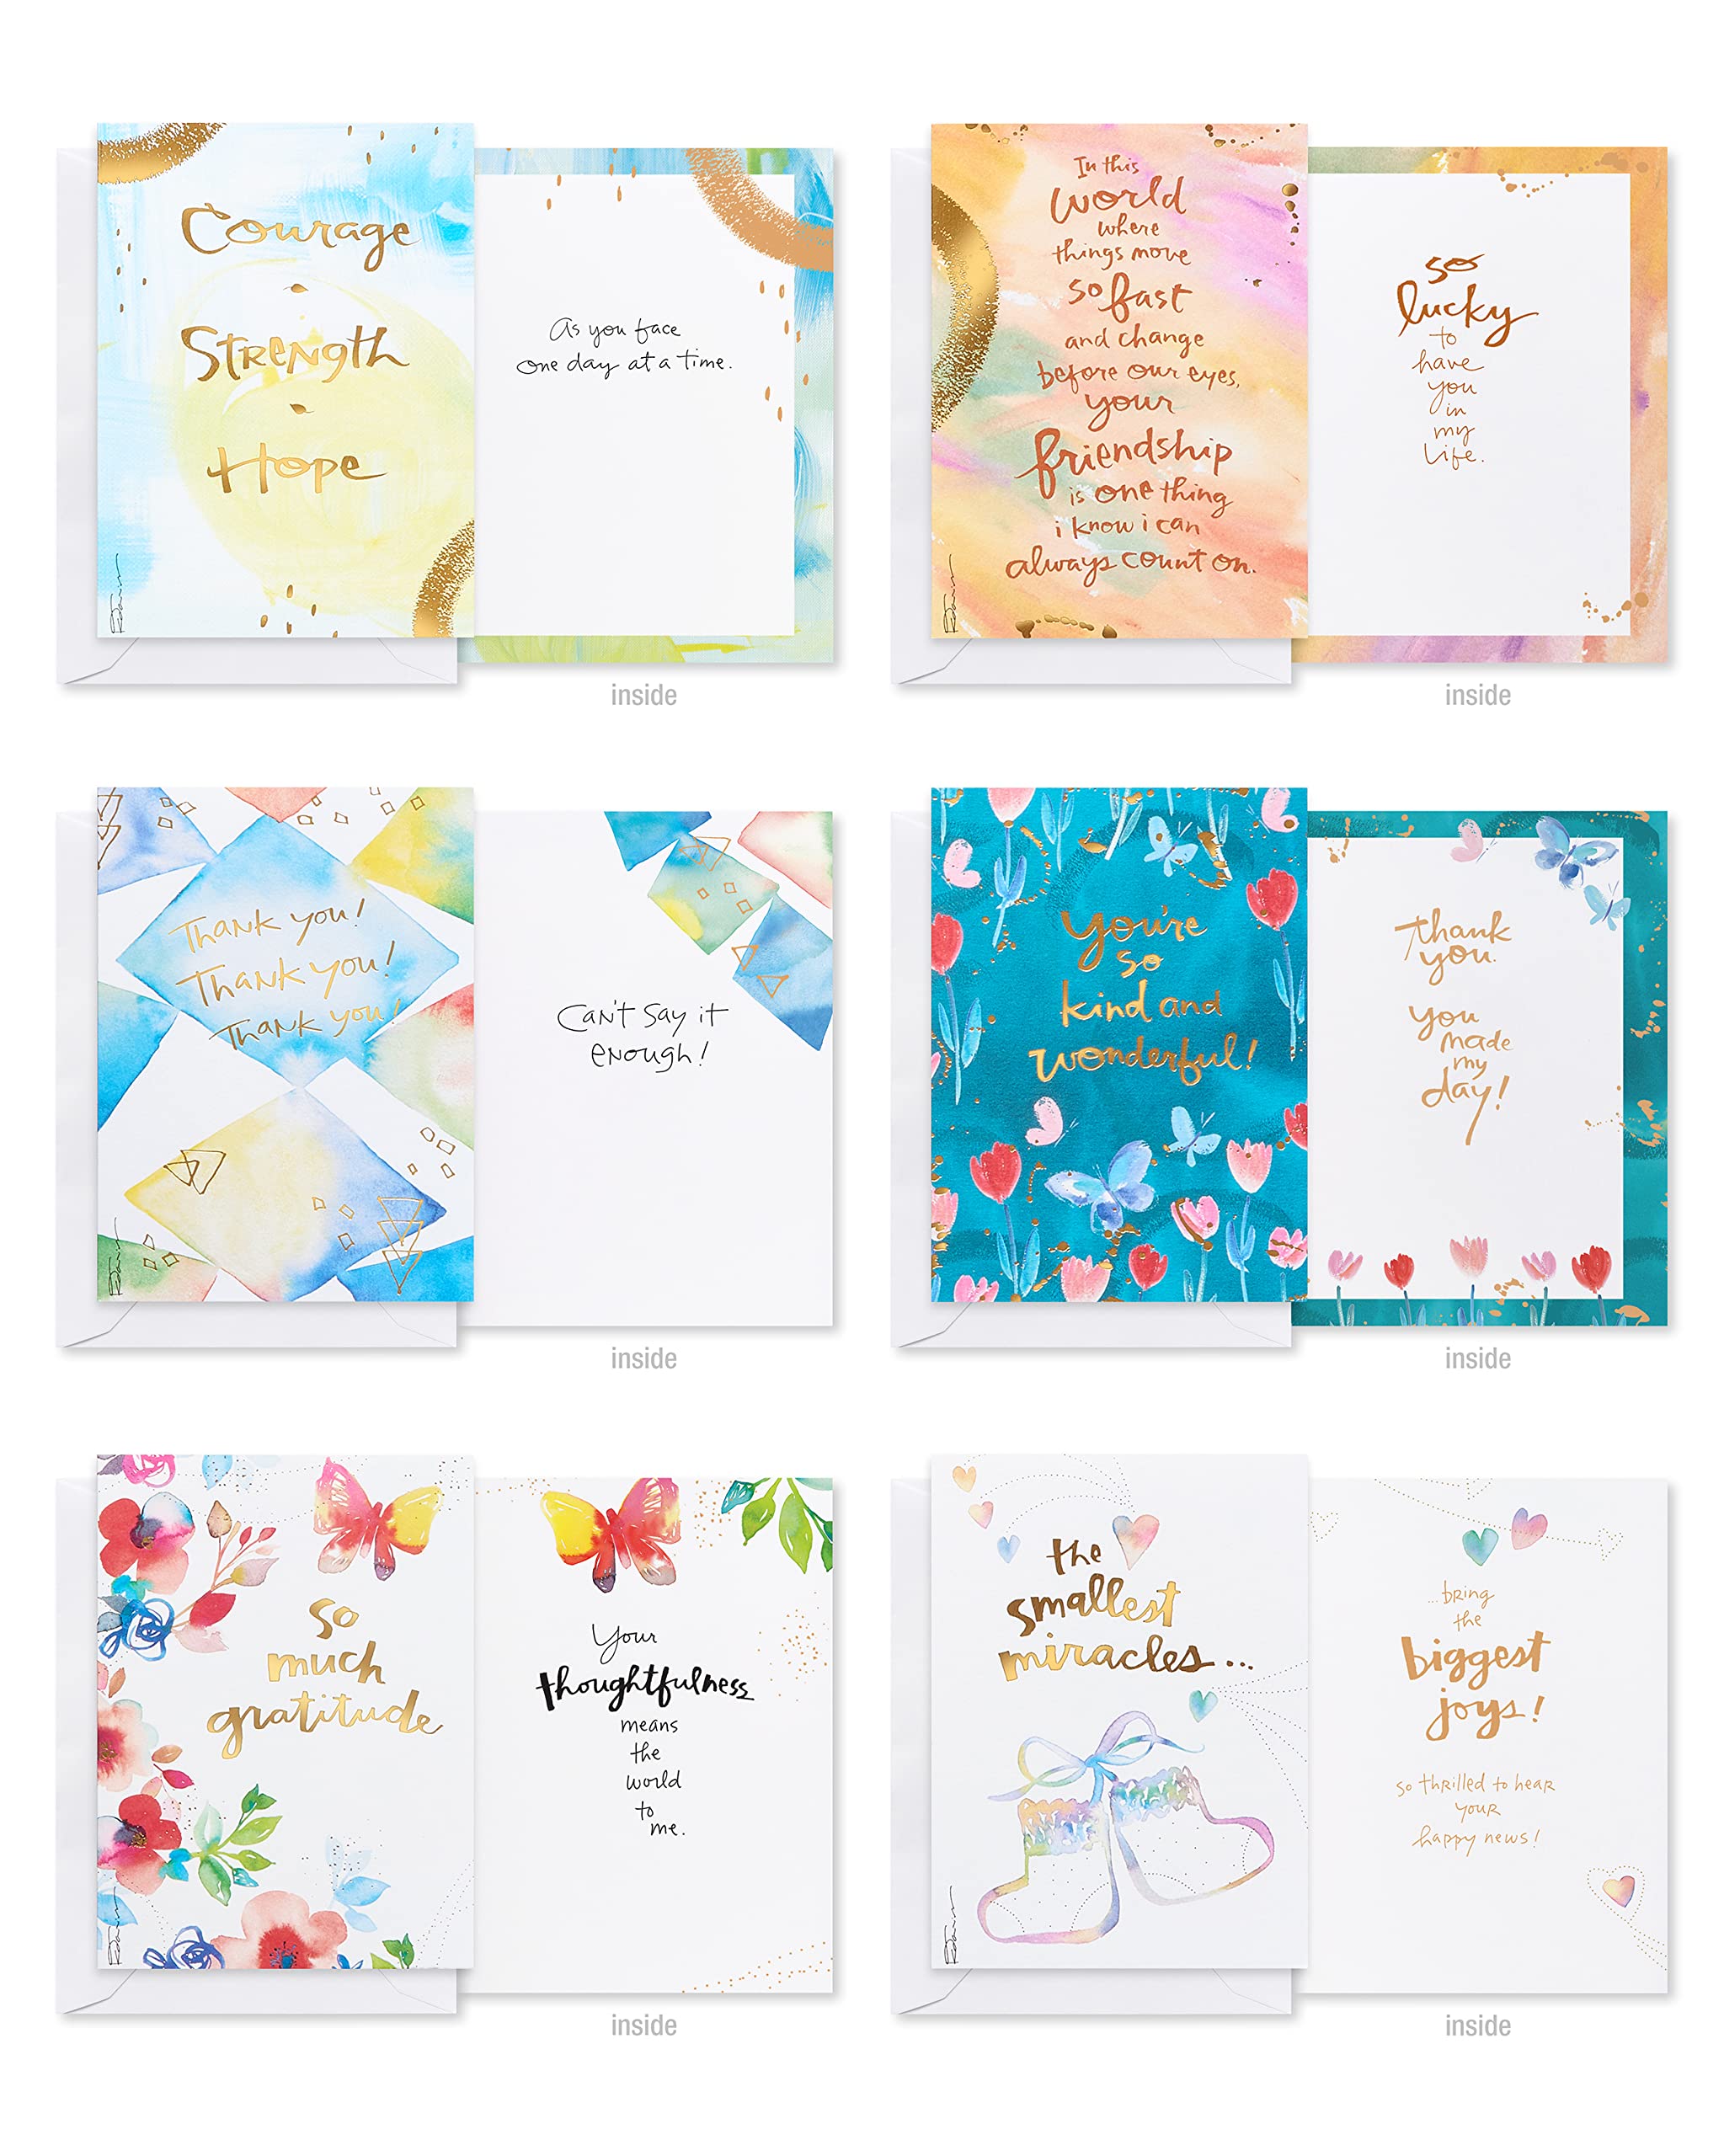 American Greetings All Occasion Card Bundle, Kathy Davis Designs (40-Count)